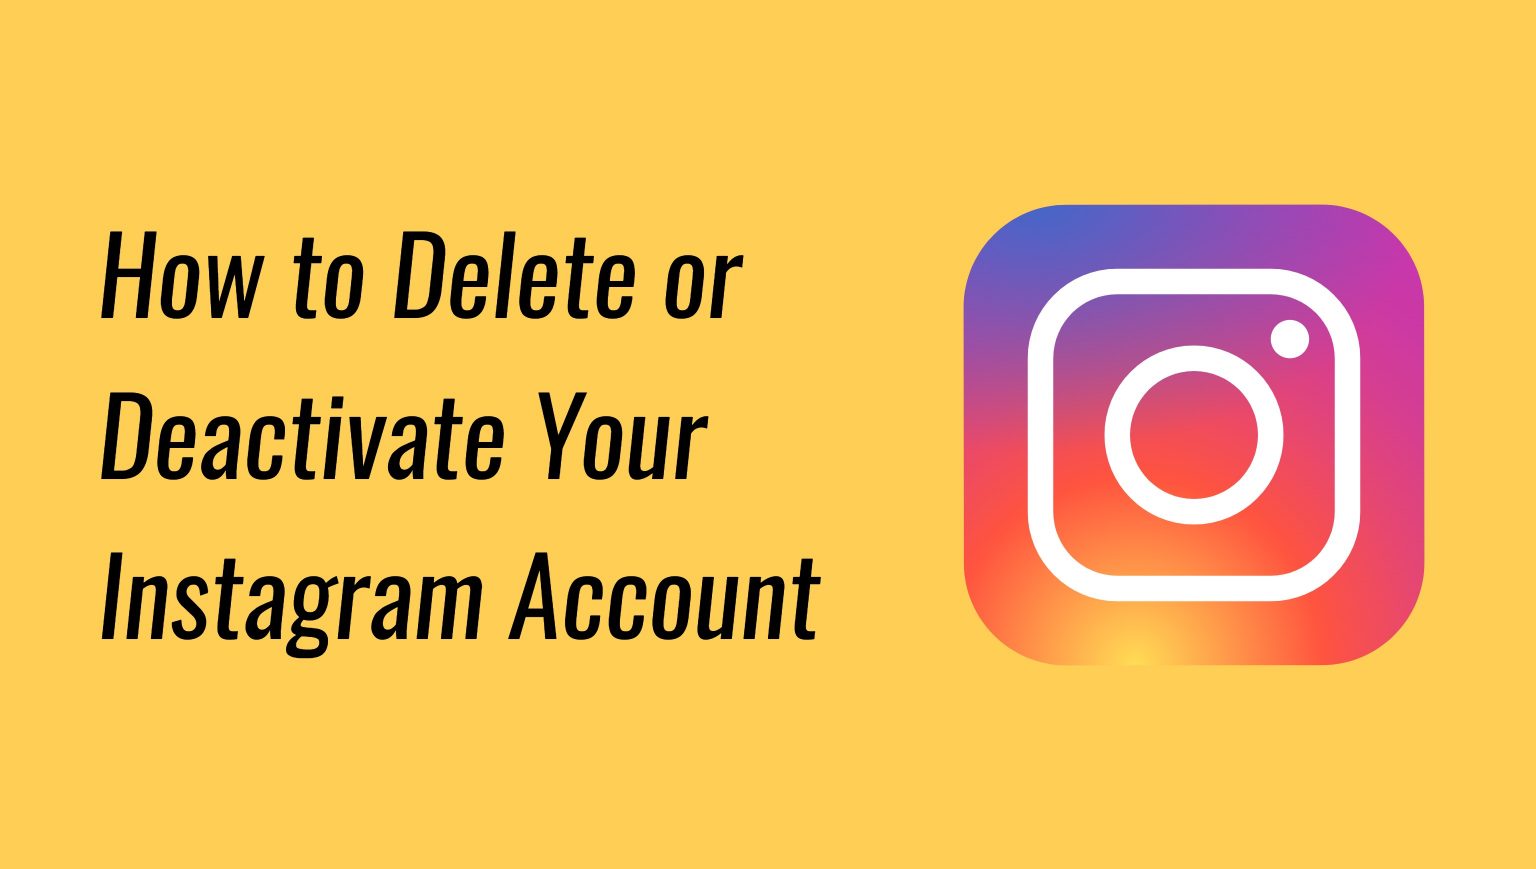 How to Delete or Deactivate Your Instagram Account?